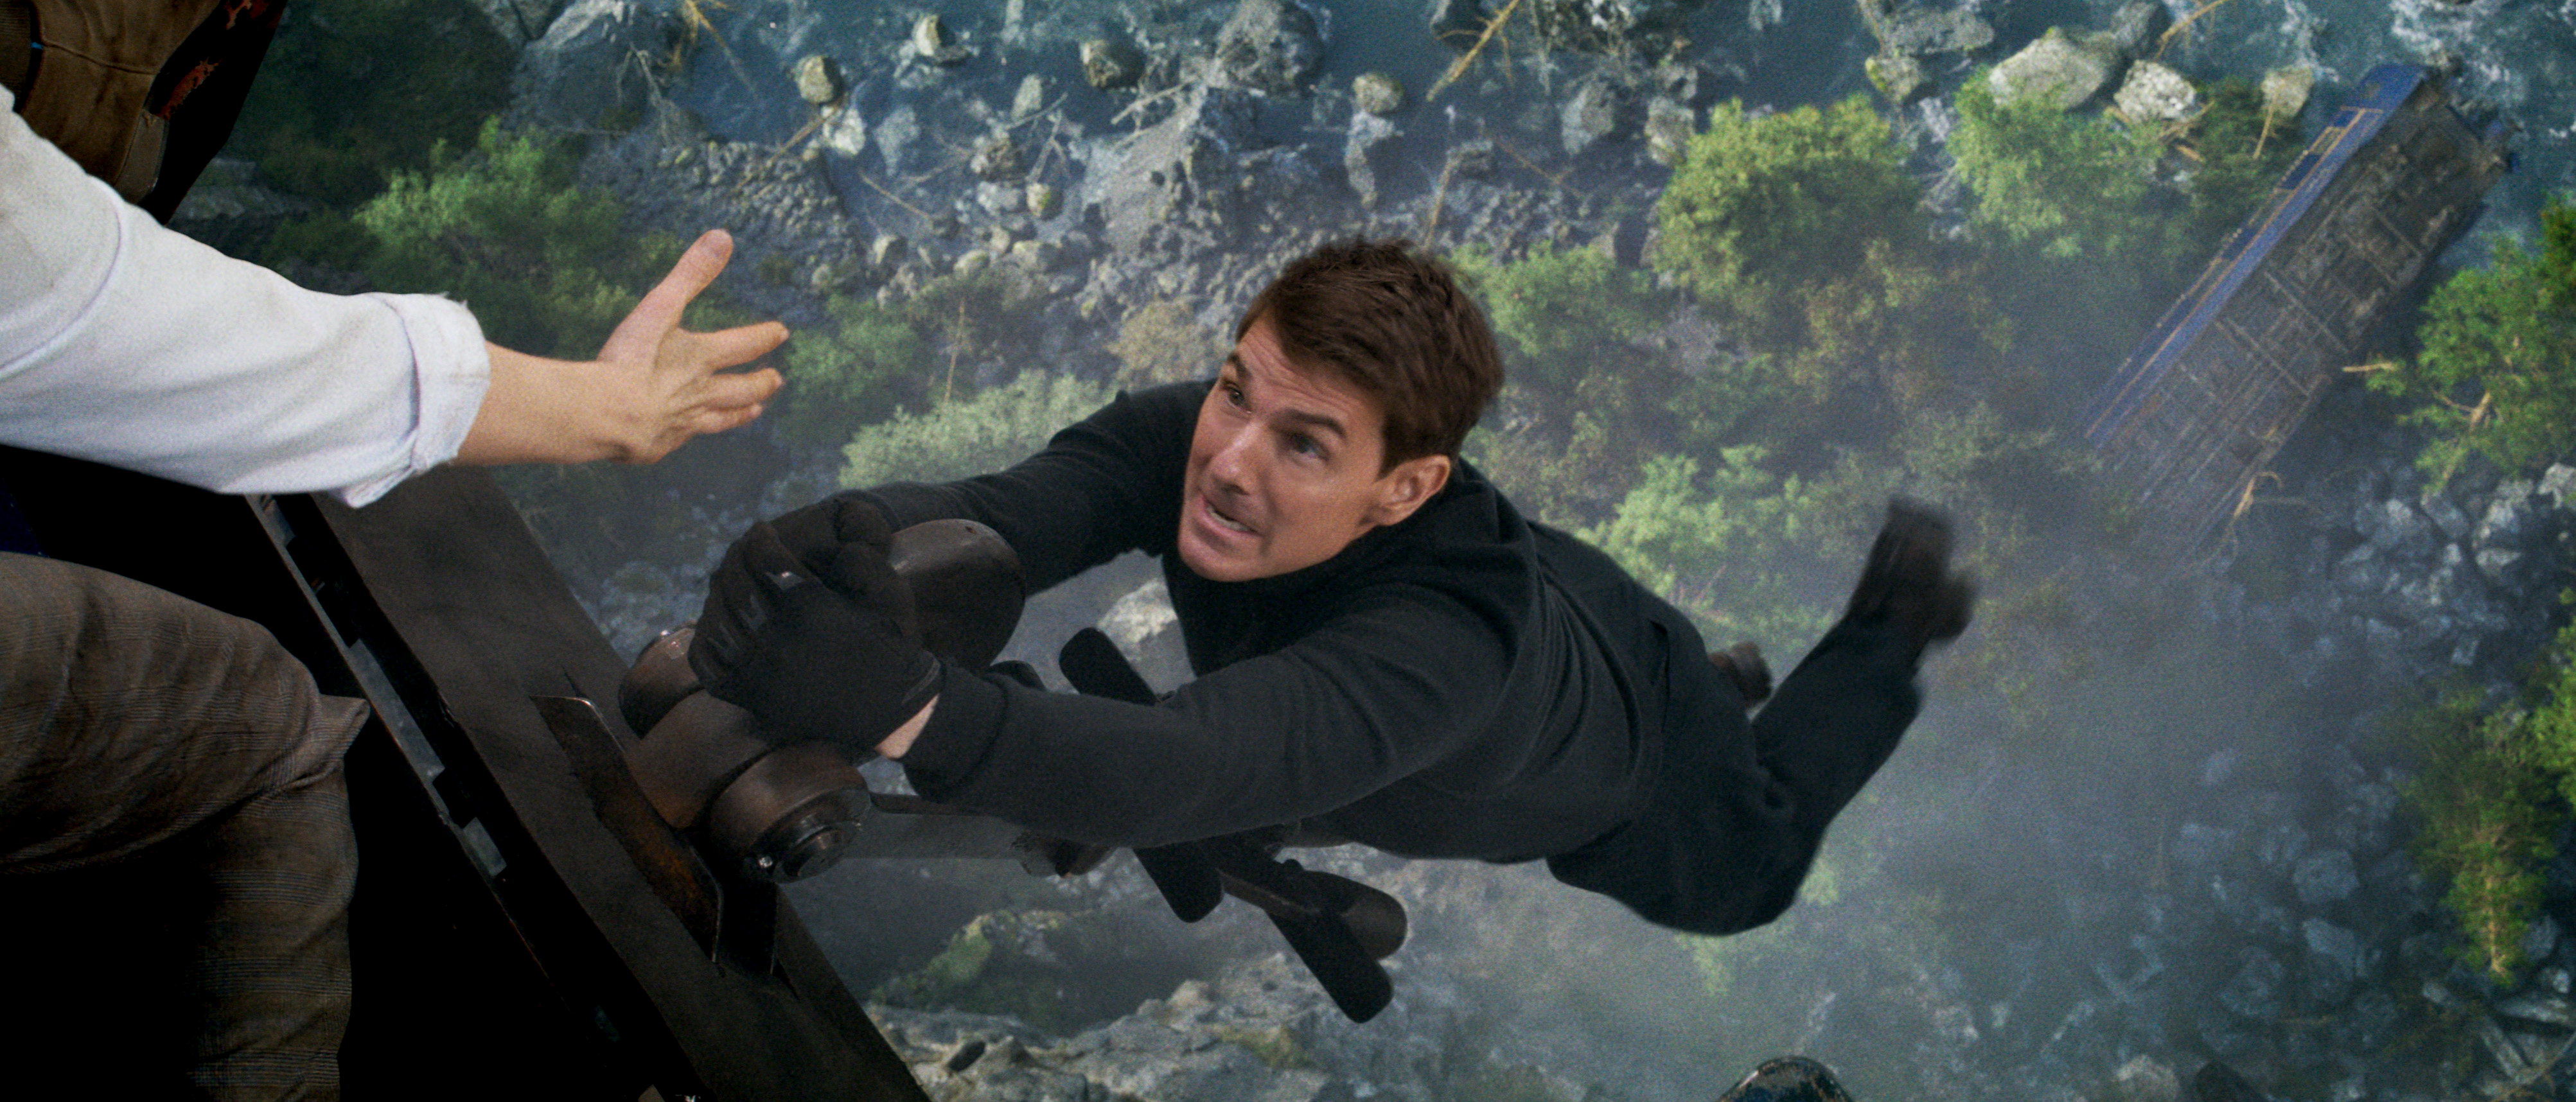 Tom Cruise as Ethan Hunt hanging off the edge of a train with a ravine very far below him as an outstretched hand from someone offscreen reaches for him in Mission: Impossible — Dead Reckoning Part 1